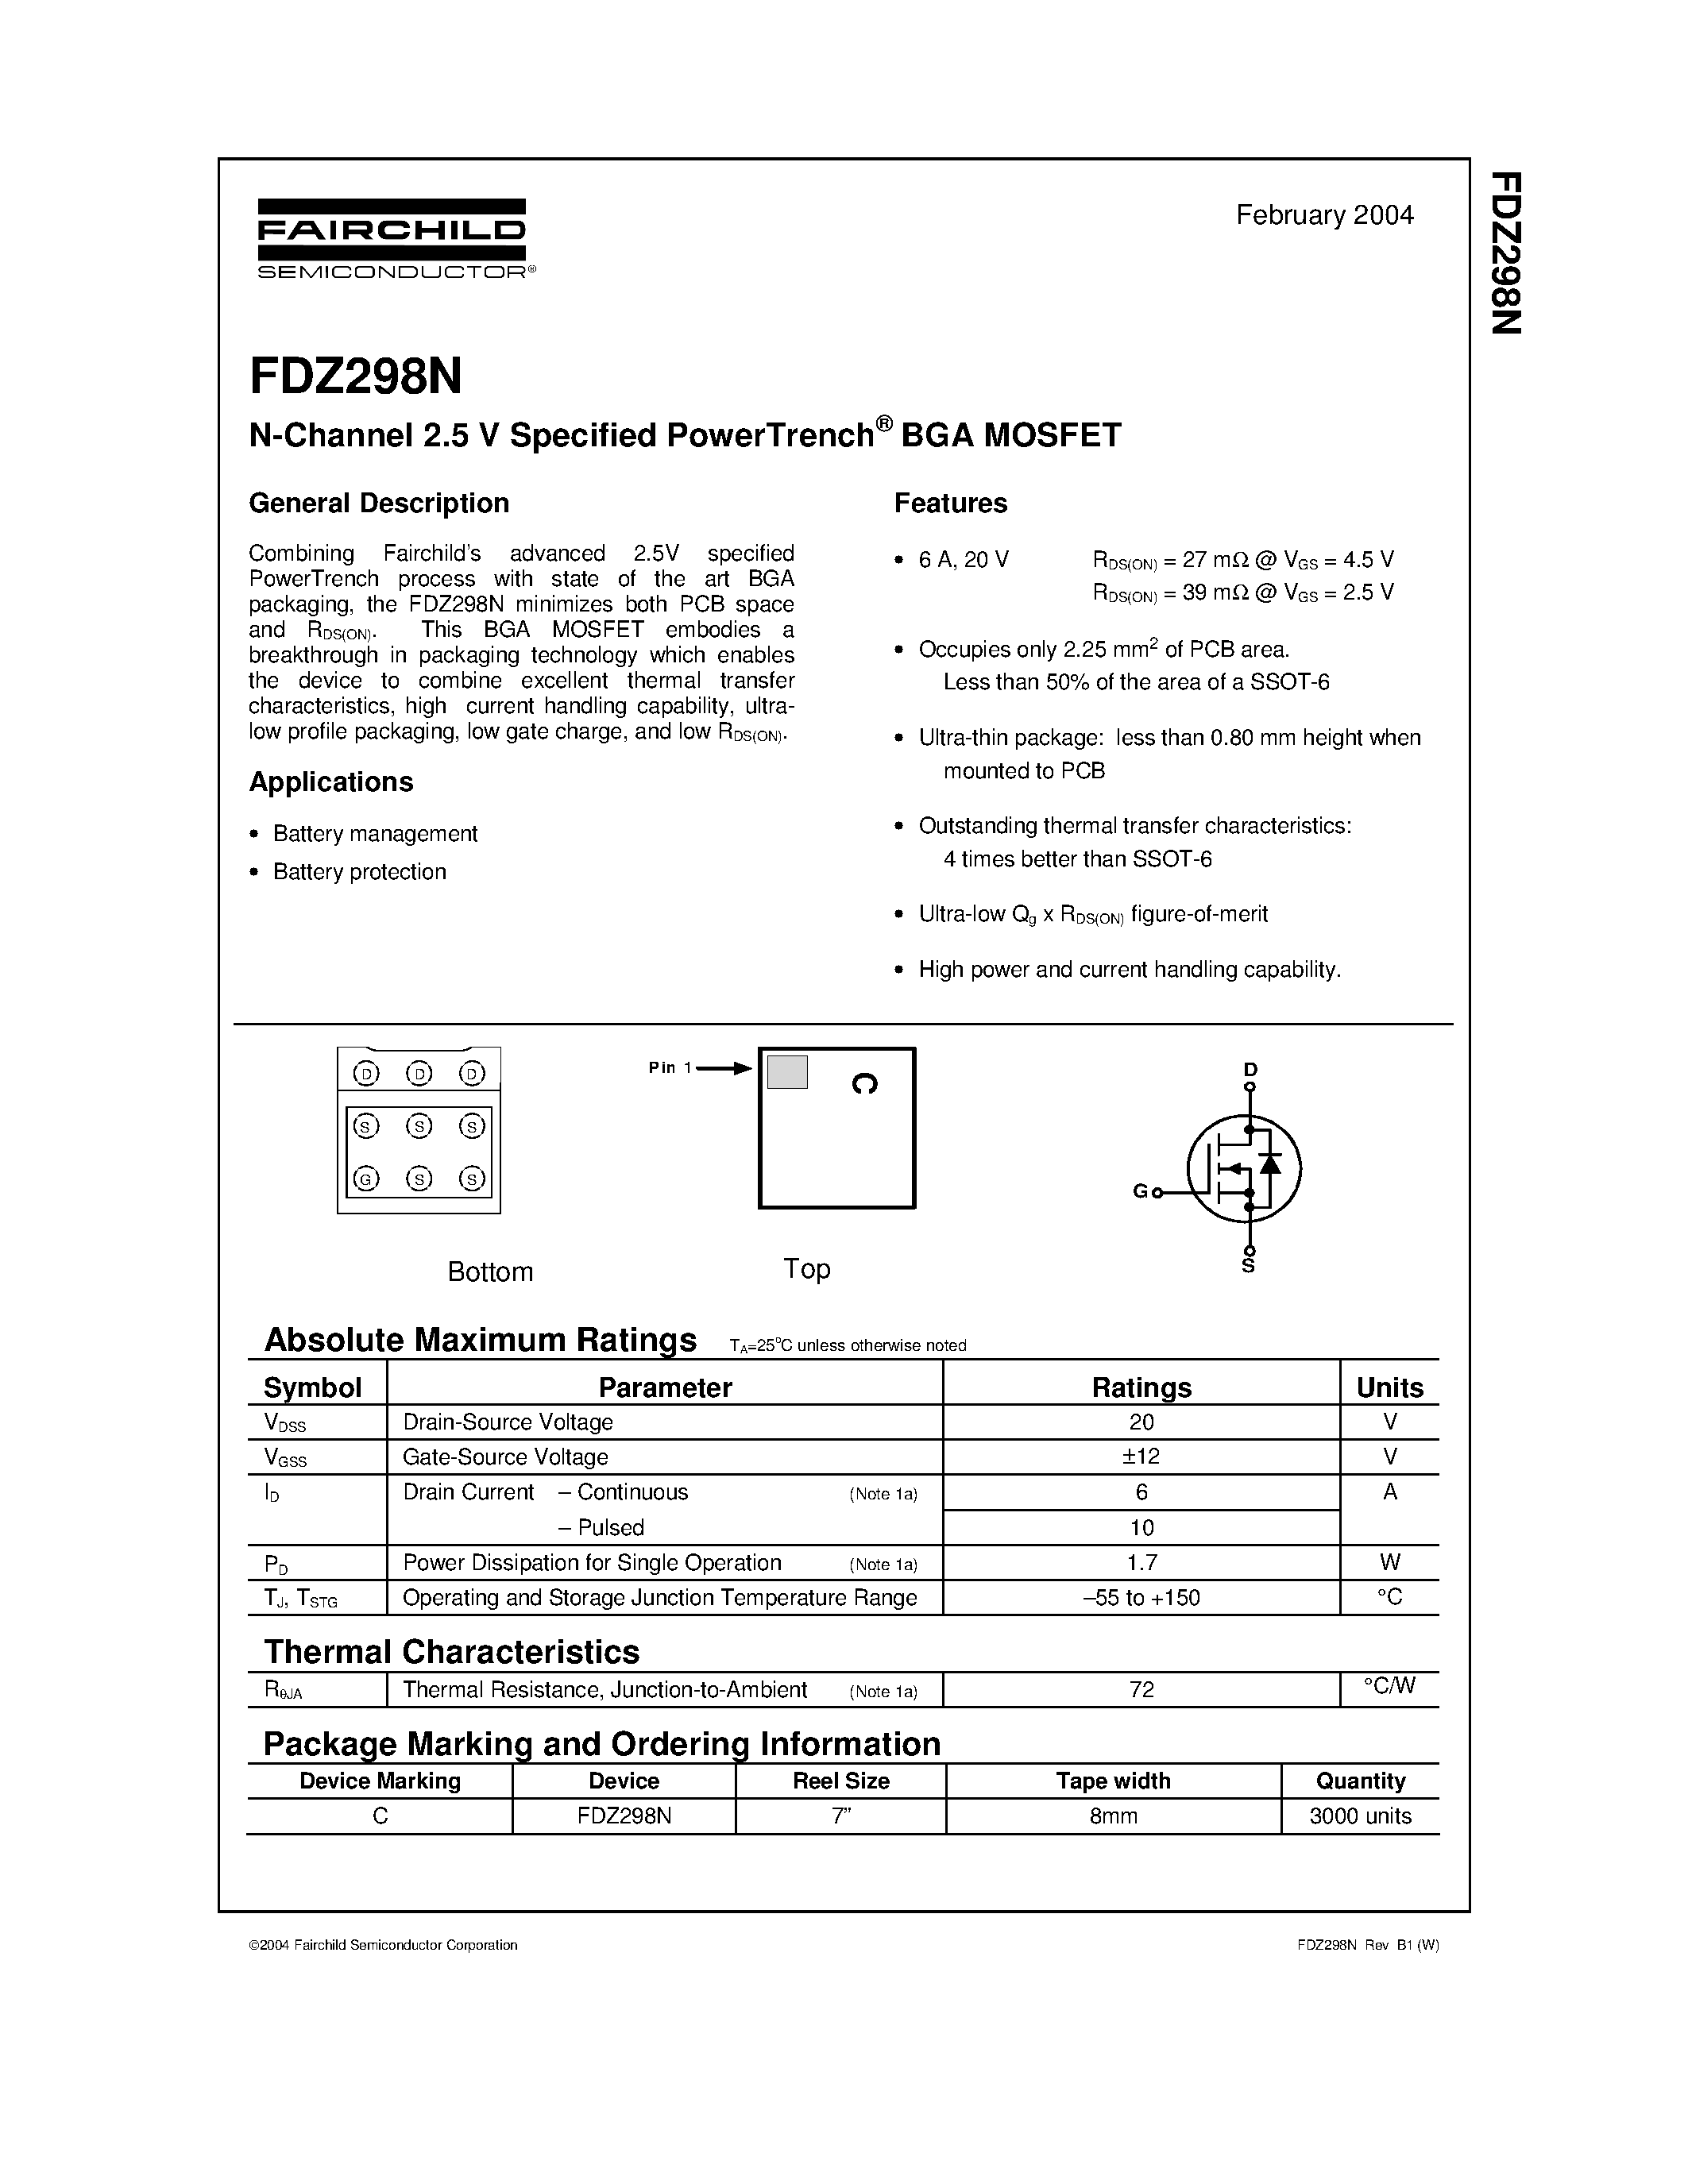 Даташит FDZ298N - N-Channel 2.5 V Specified PowerTrench BGA MOSFET страница 1